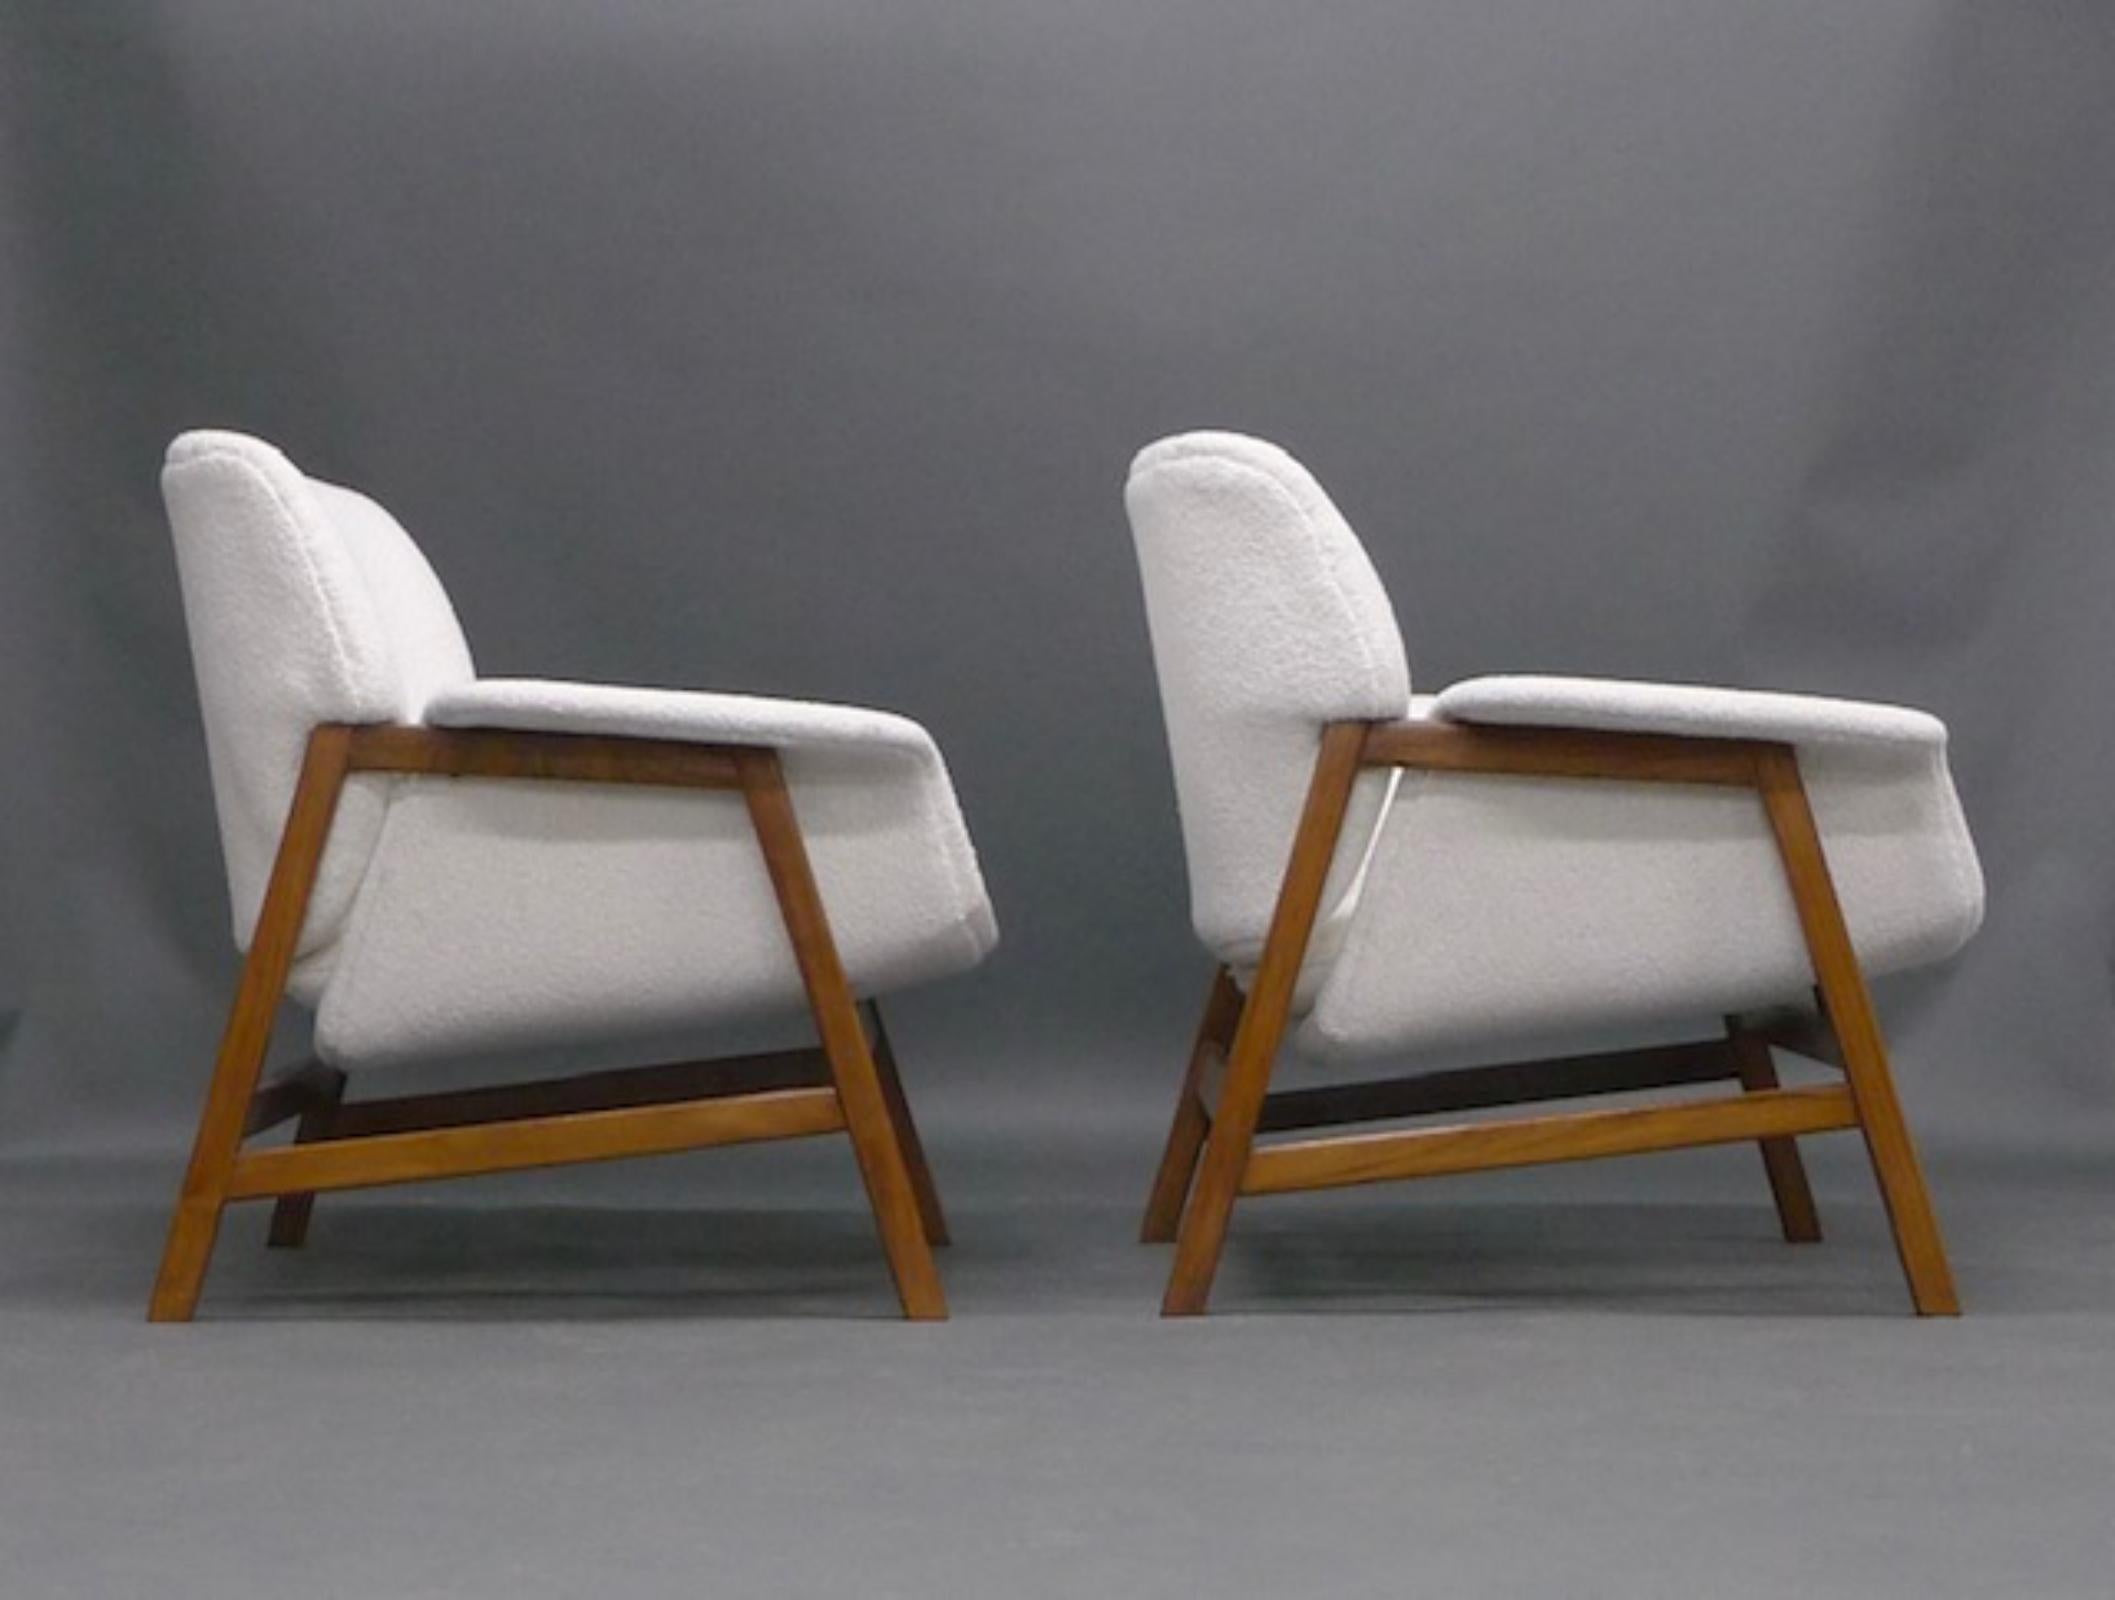 Gianfranco Frattini, Pair of Lounge Chairs, model 849 for Cassina, 1950s In Good Condition For Sale In Wargrave, Berkshire